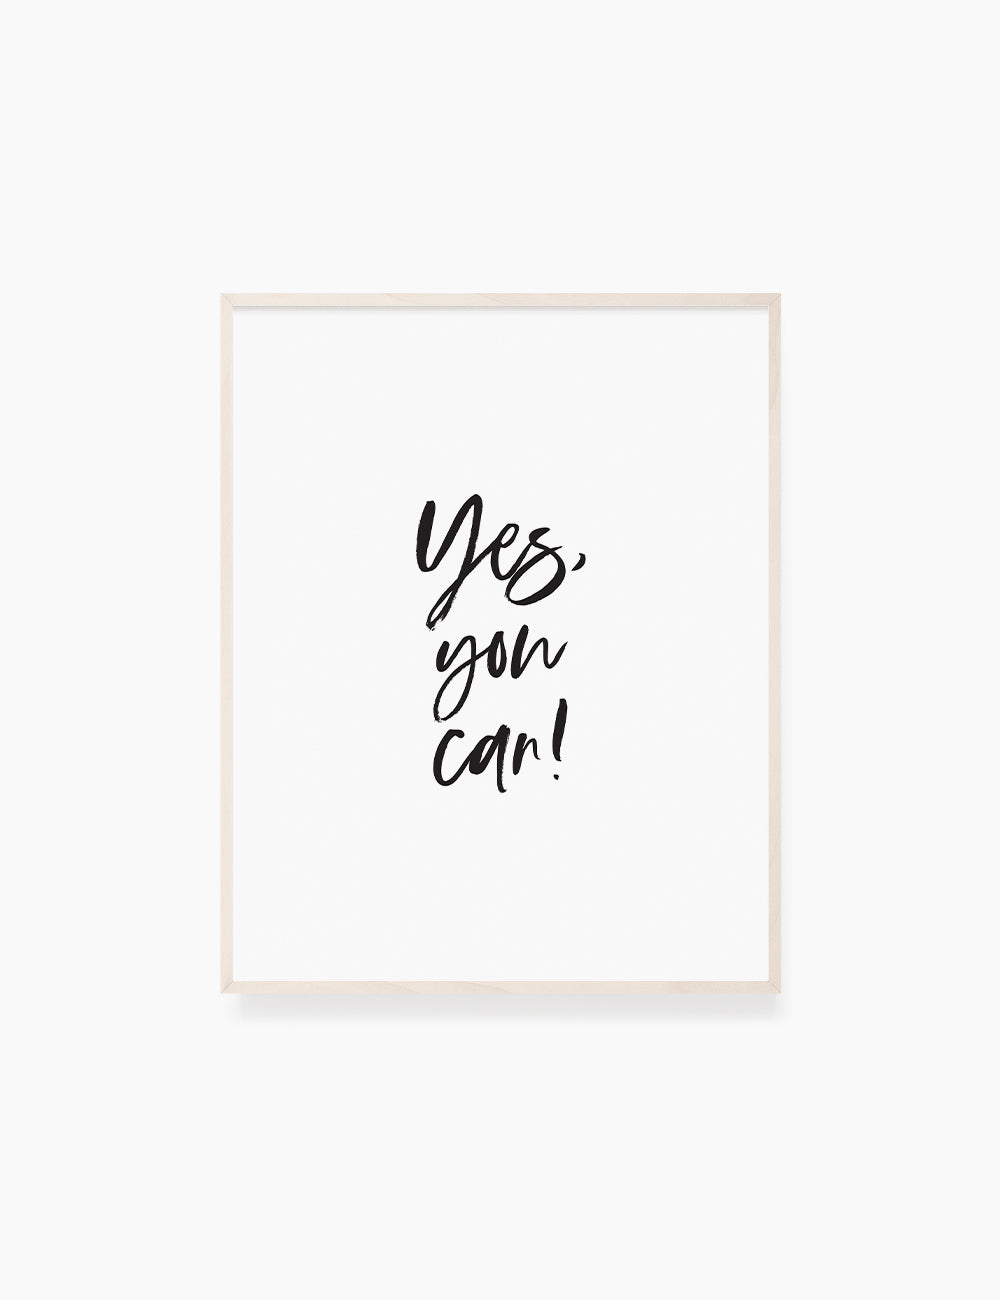 Printable Wall Art Quote: YES, YOU CAN! Printable Poster. Inspirational Quote. Motivational Quote. WA035 - Paper Moon Art & Design